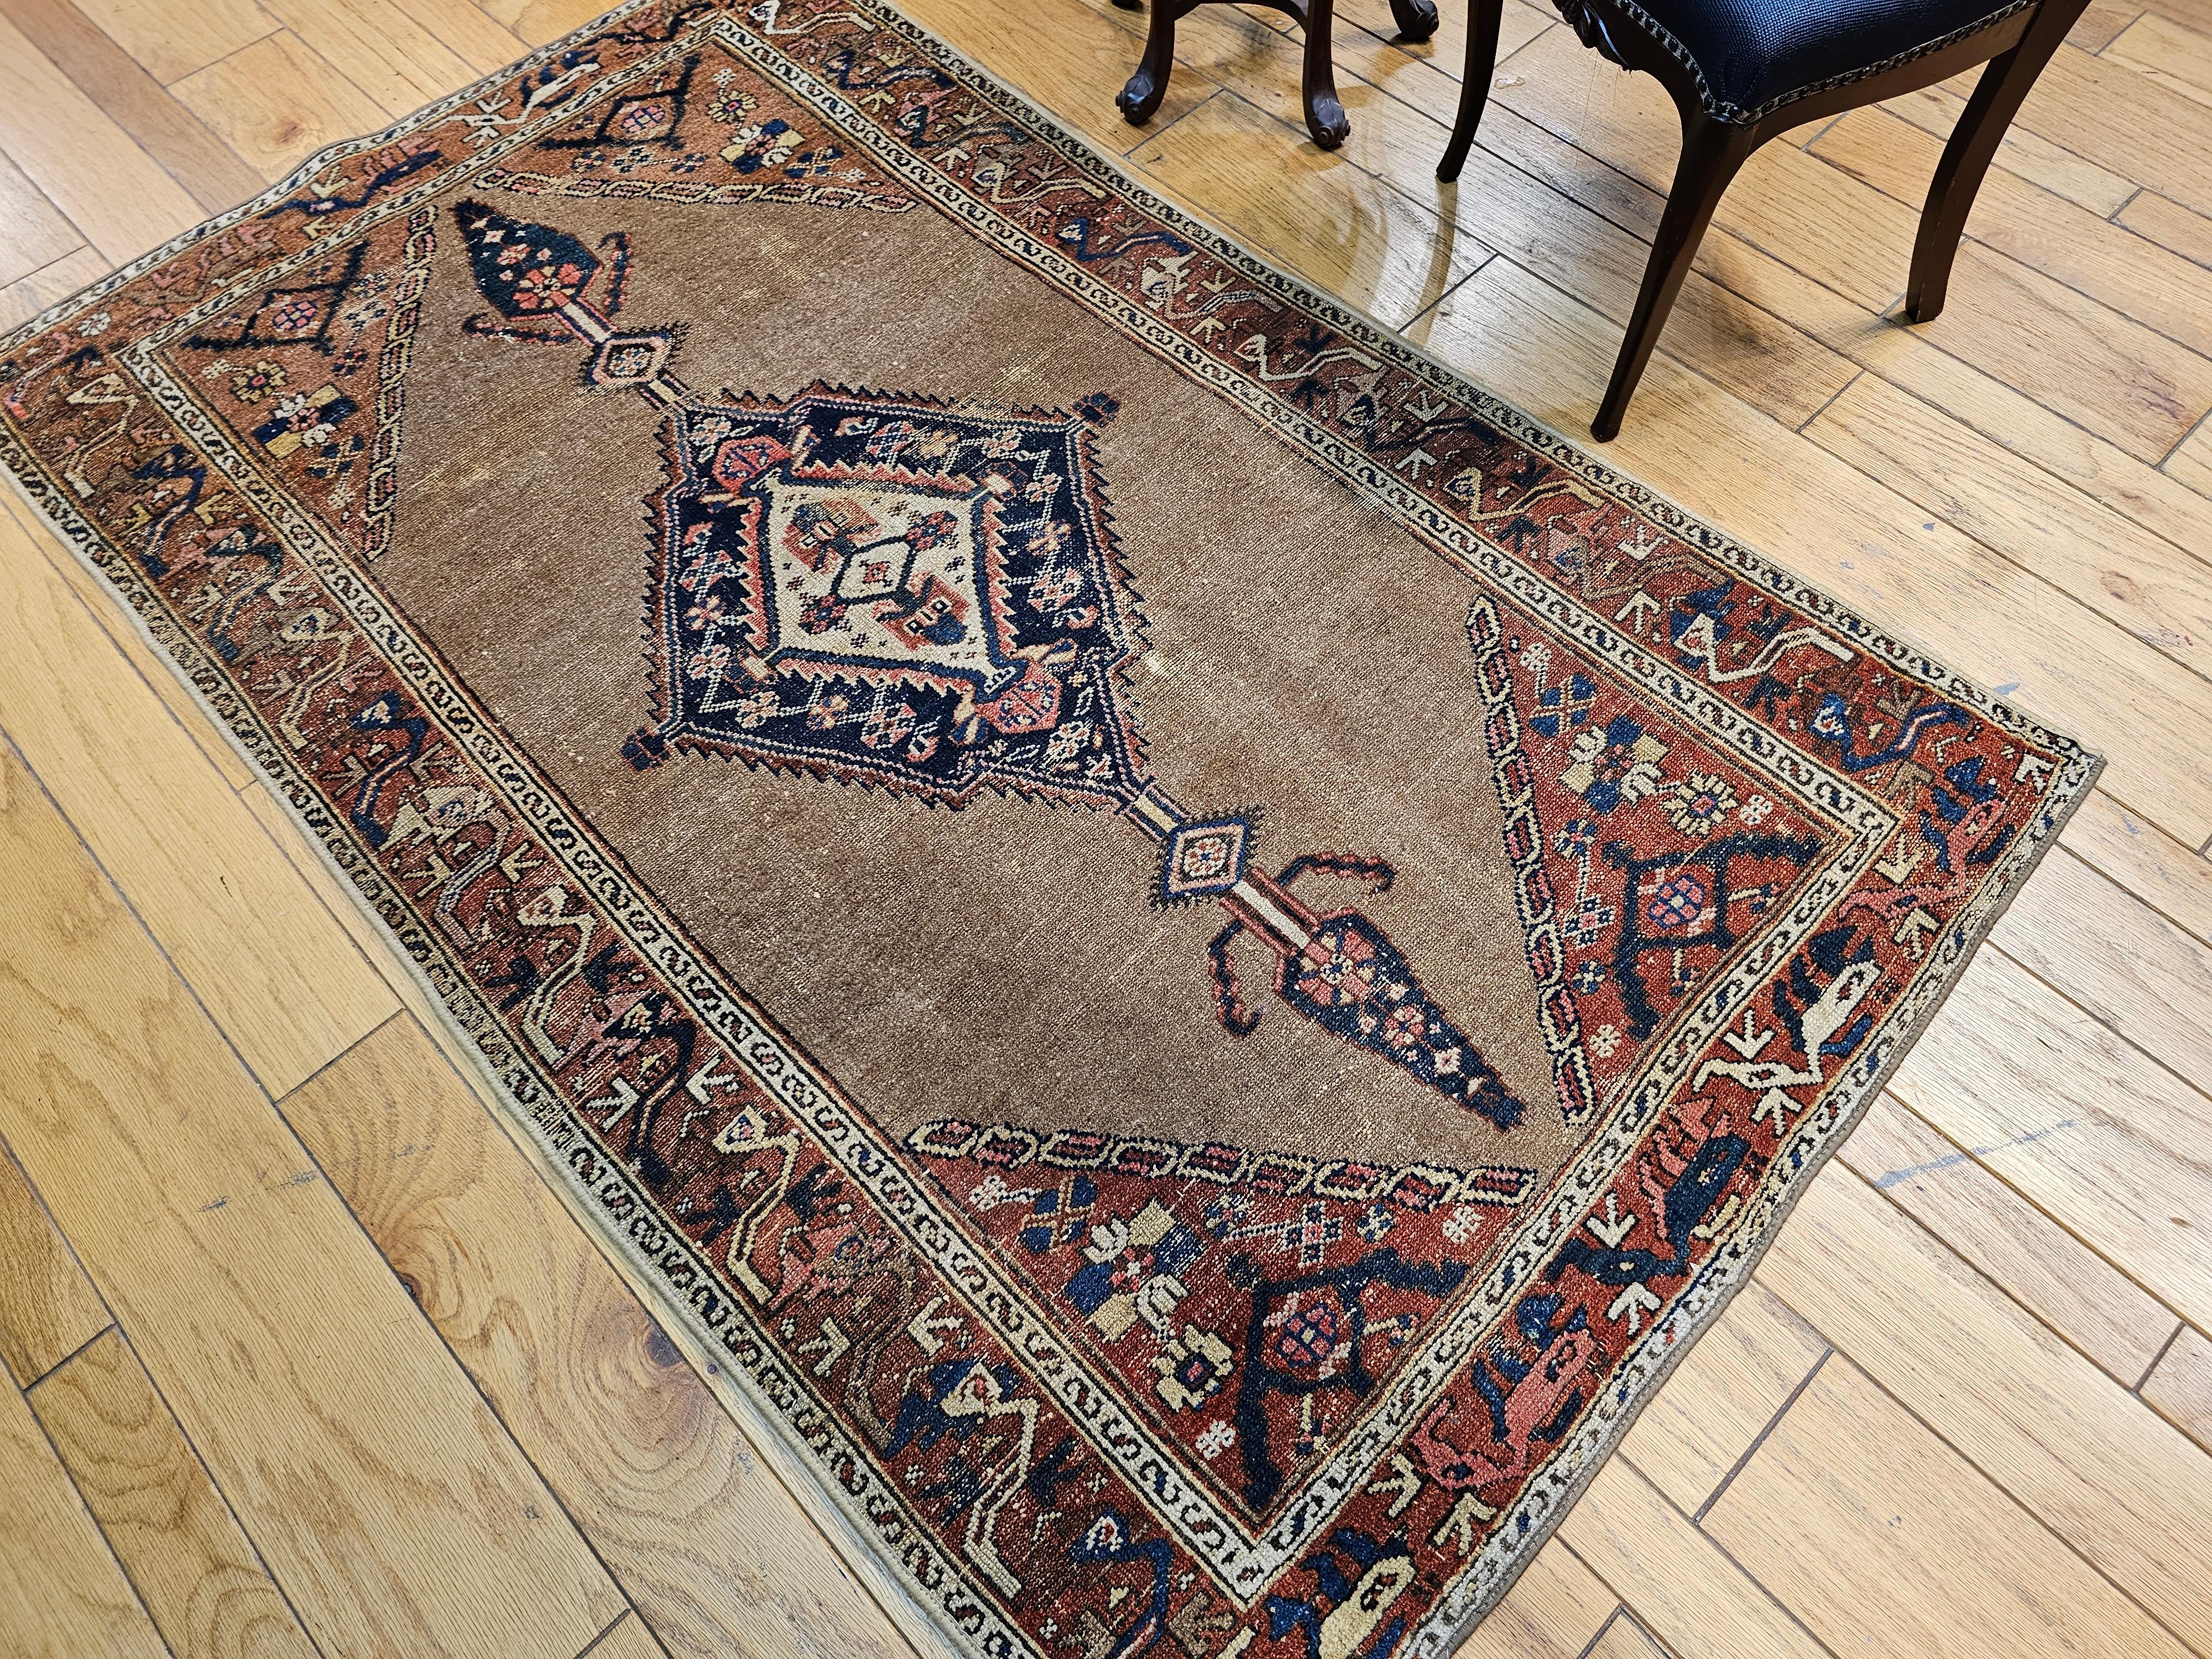 Vintage Persian Camelhair Malayer Area Rug in Camel, Navy, Ivory, Rust Red, Blue For Sale 8